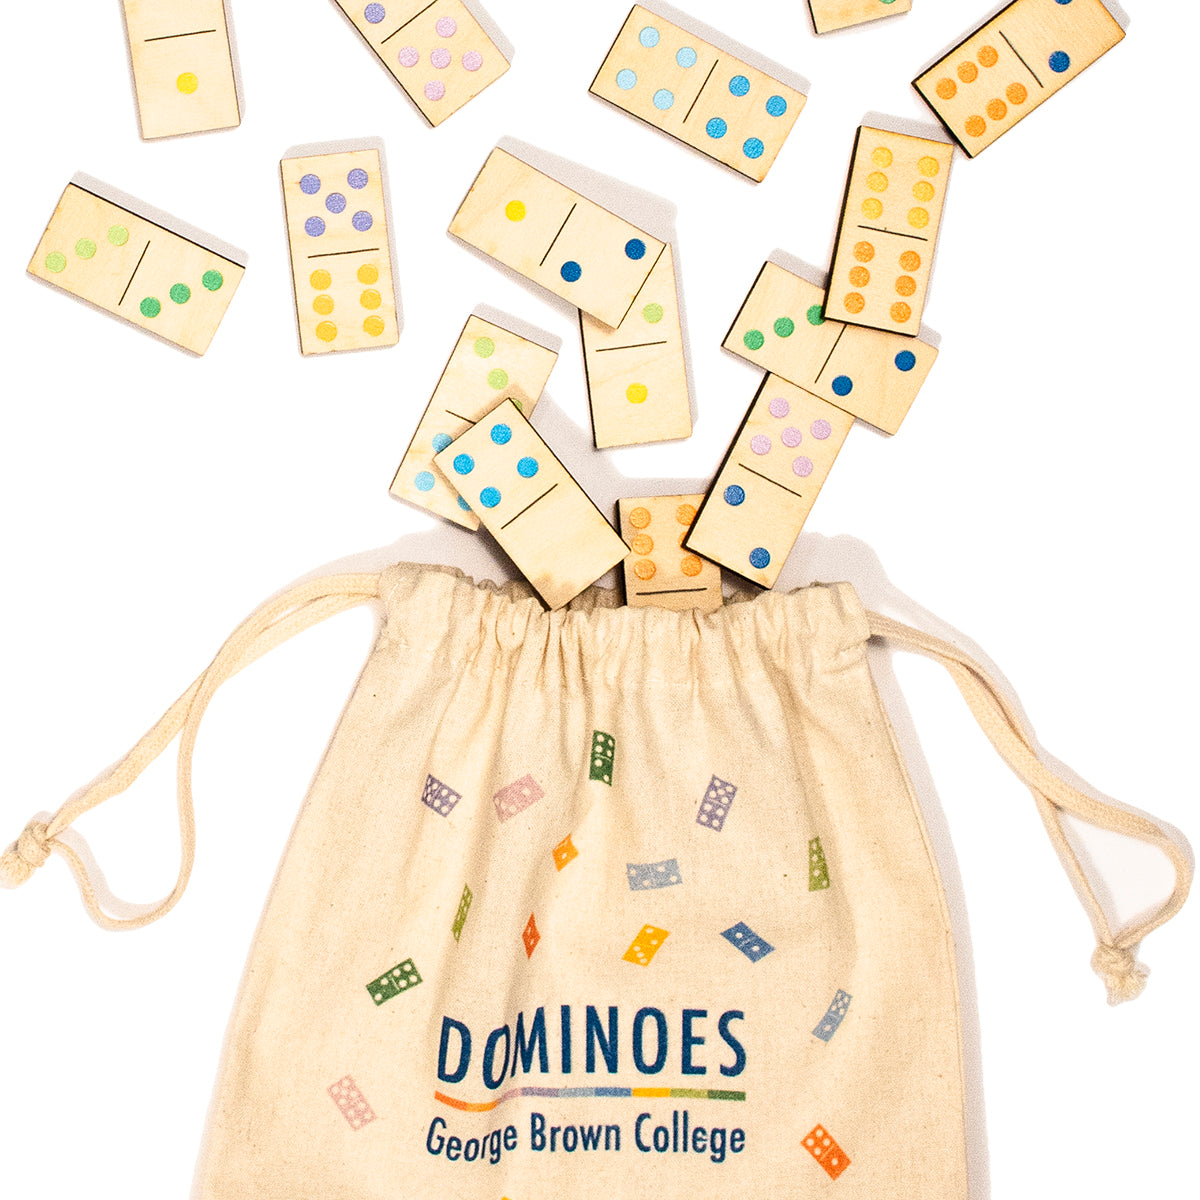 wooden dominos with 100% cotton drawstring bag featuring George Brown College Dominoes text